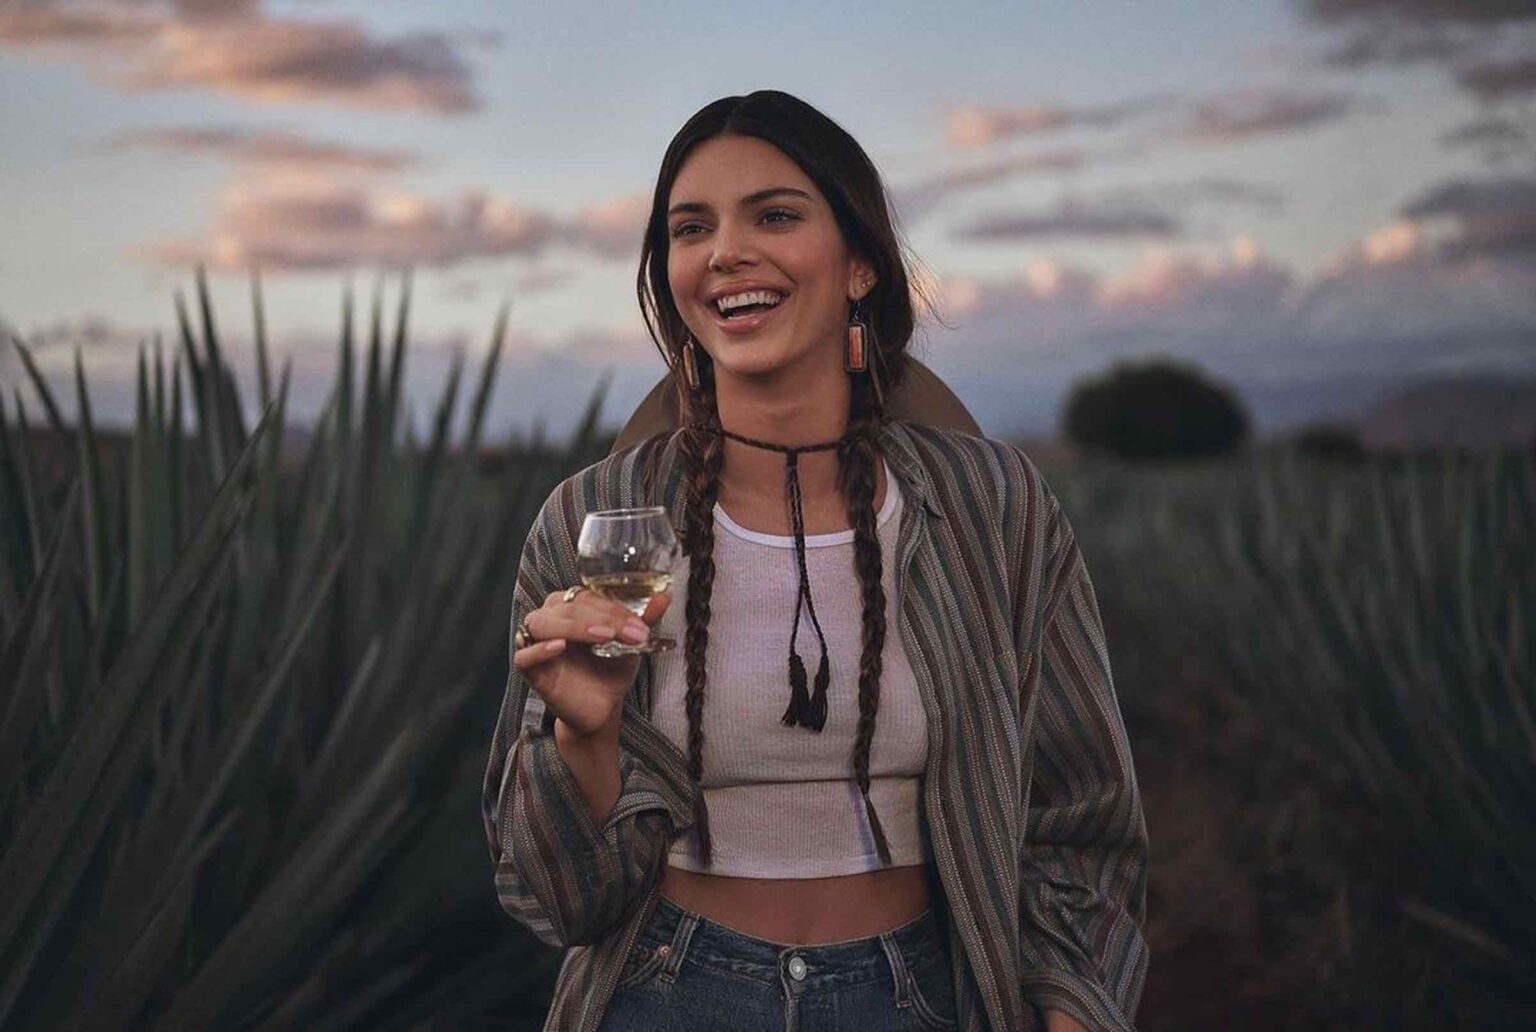 Kendall Jenner has once again fallen under public scrutiny. Grab a shot glass and dive into the Kendall Jenner Pepsi fiasco 2.0.